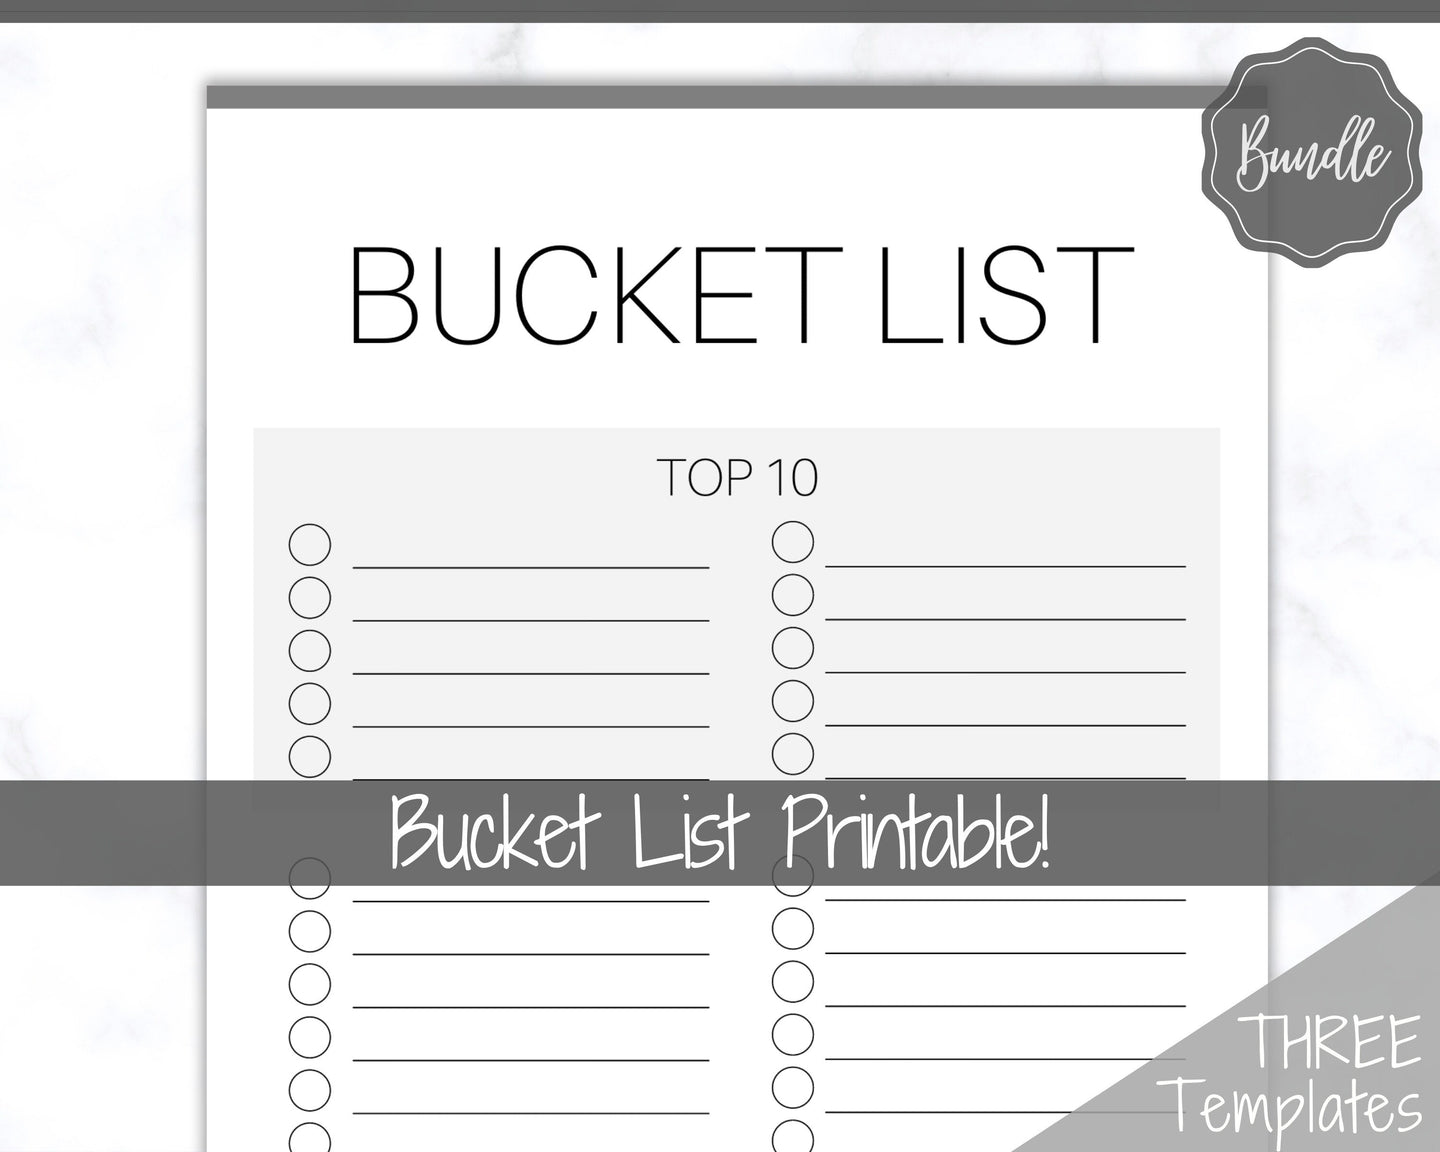 Bucket List Printable! 3 Templates Included! Top 100 things to do, Wish List Tracker, Holiday, Travel, New Year, Goal Planner, To Do List | Mono